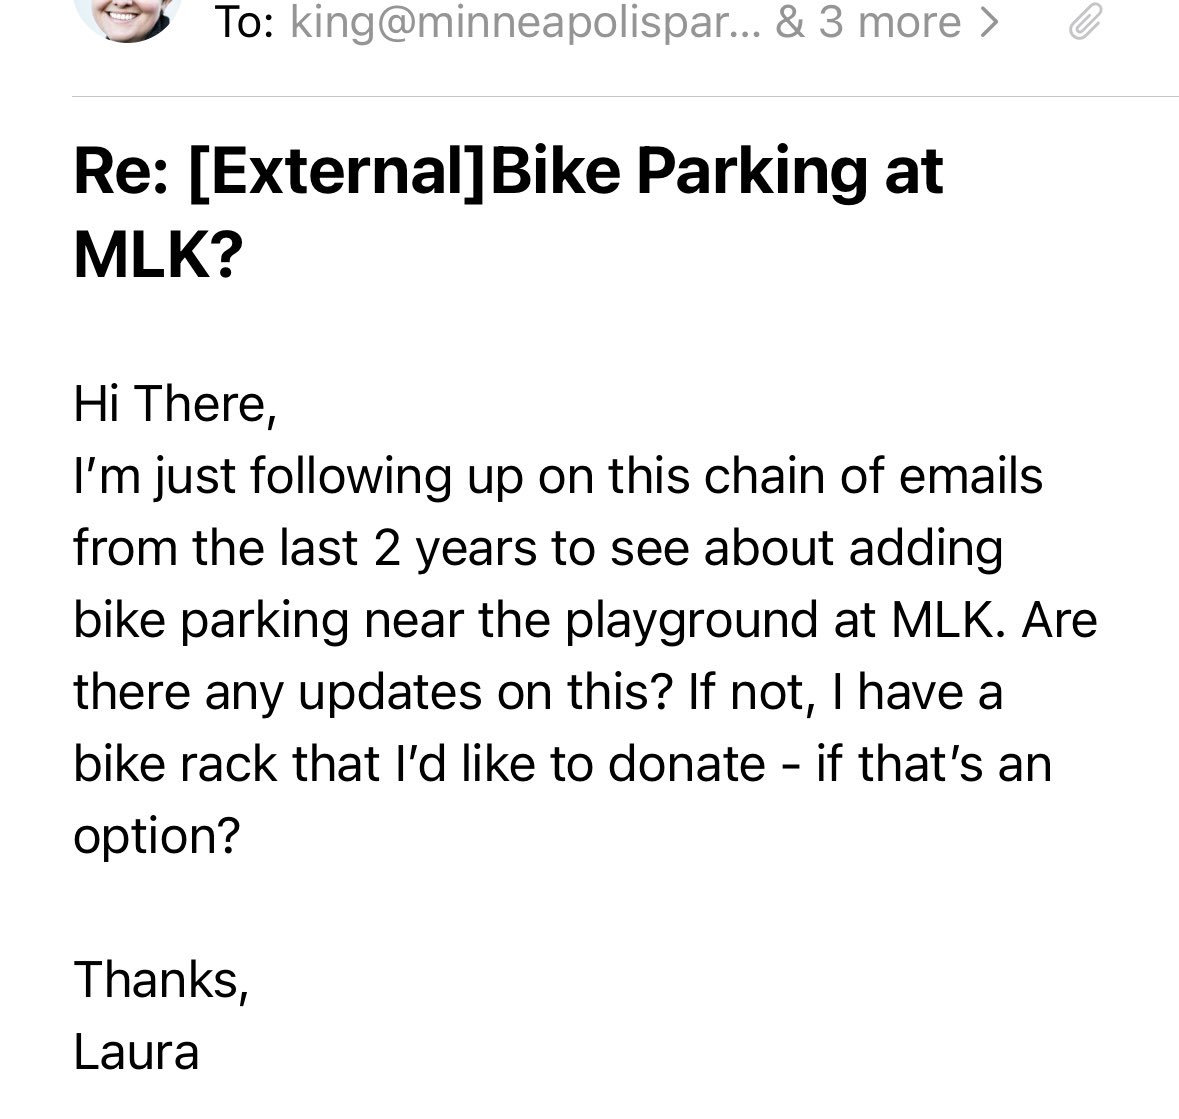 Bike advocacy is a really glamorous way to spend my free time. 

It sometimes means sending lots of emails over multiple years asking for really basic stuff (like bike parking at a city playground), before finally seeing if I can make it happen myself. #bikelobby